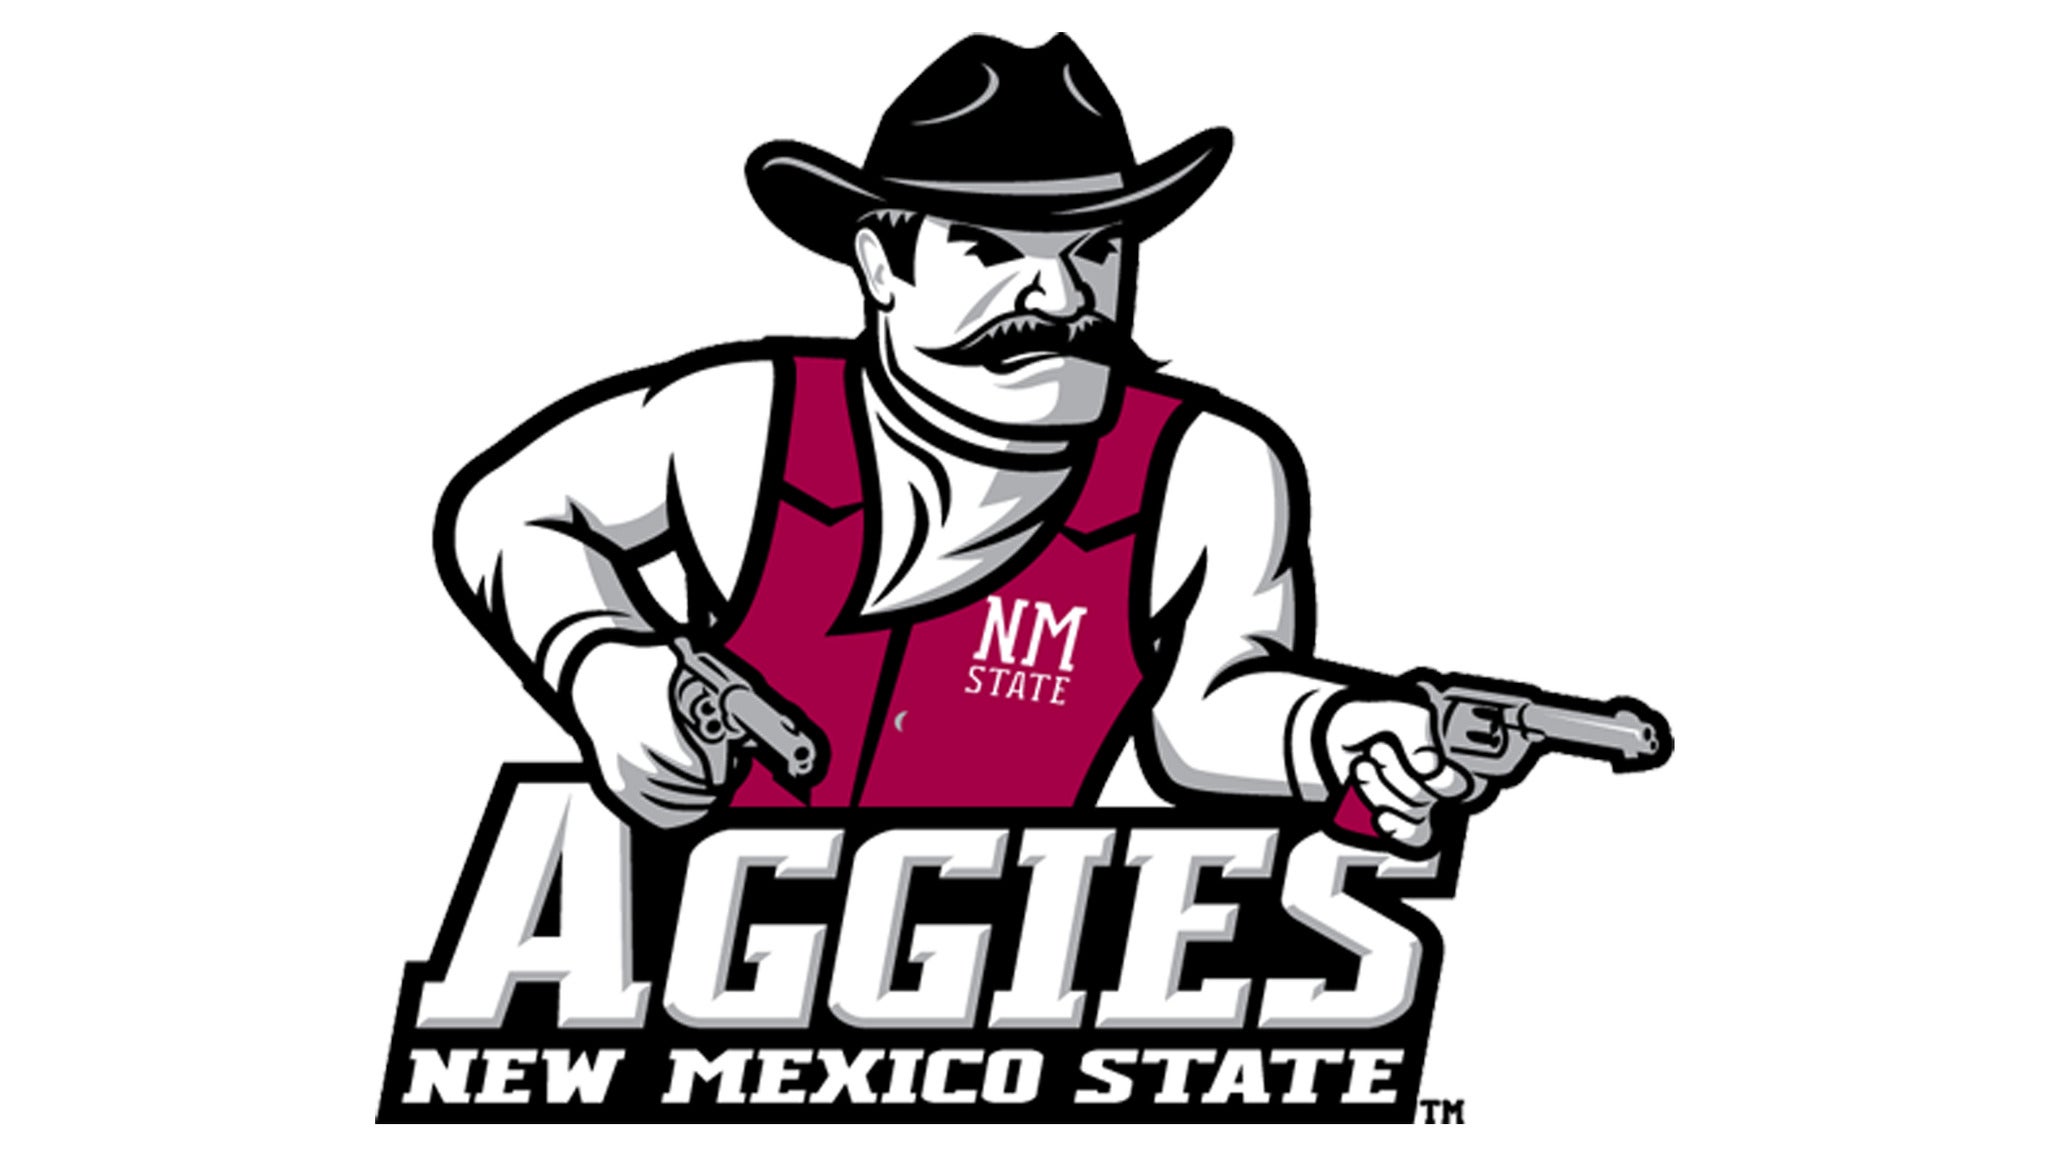 New Mexico State Univ (NMSU) Aggies Football Tickets | 2020 College